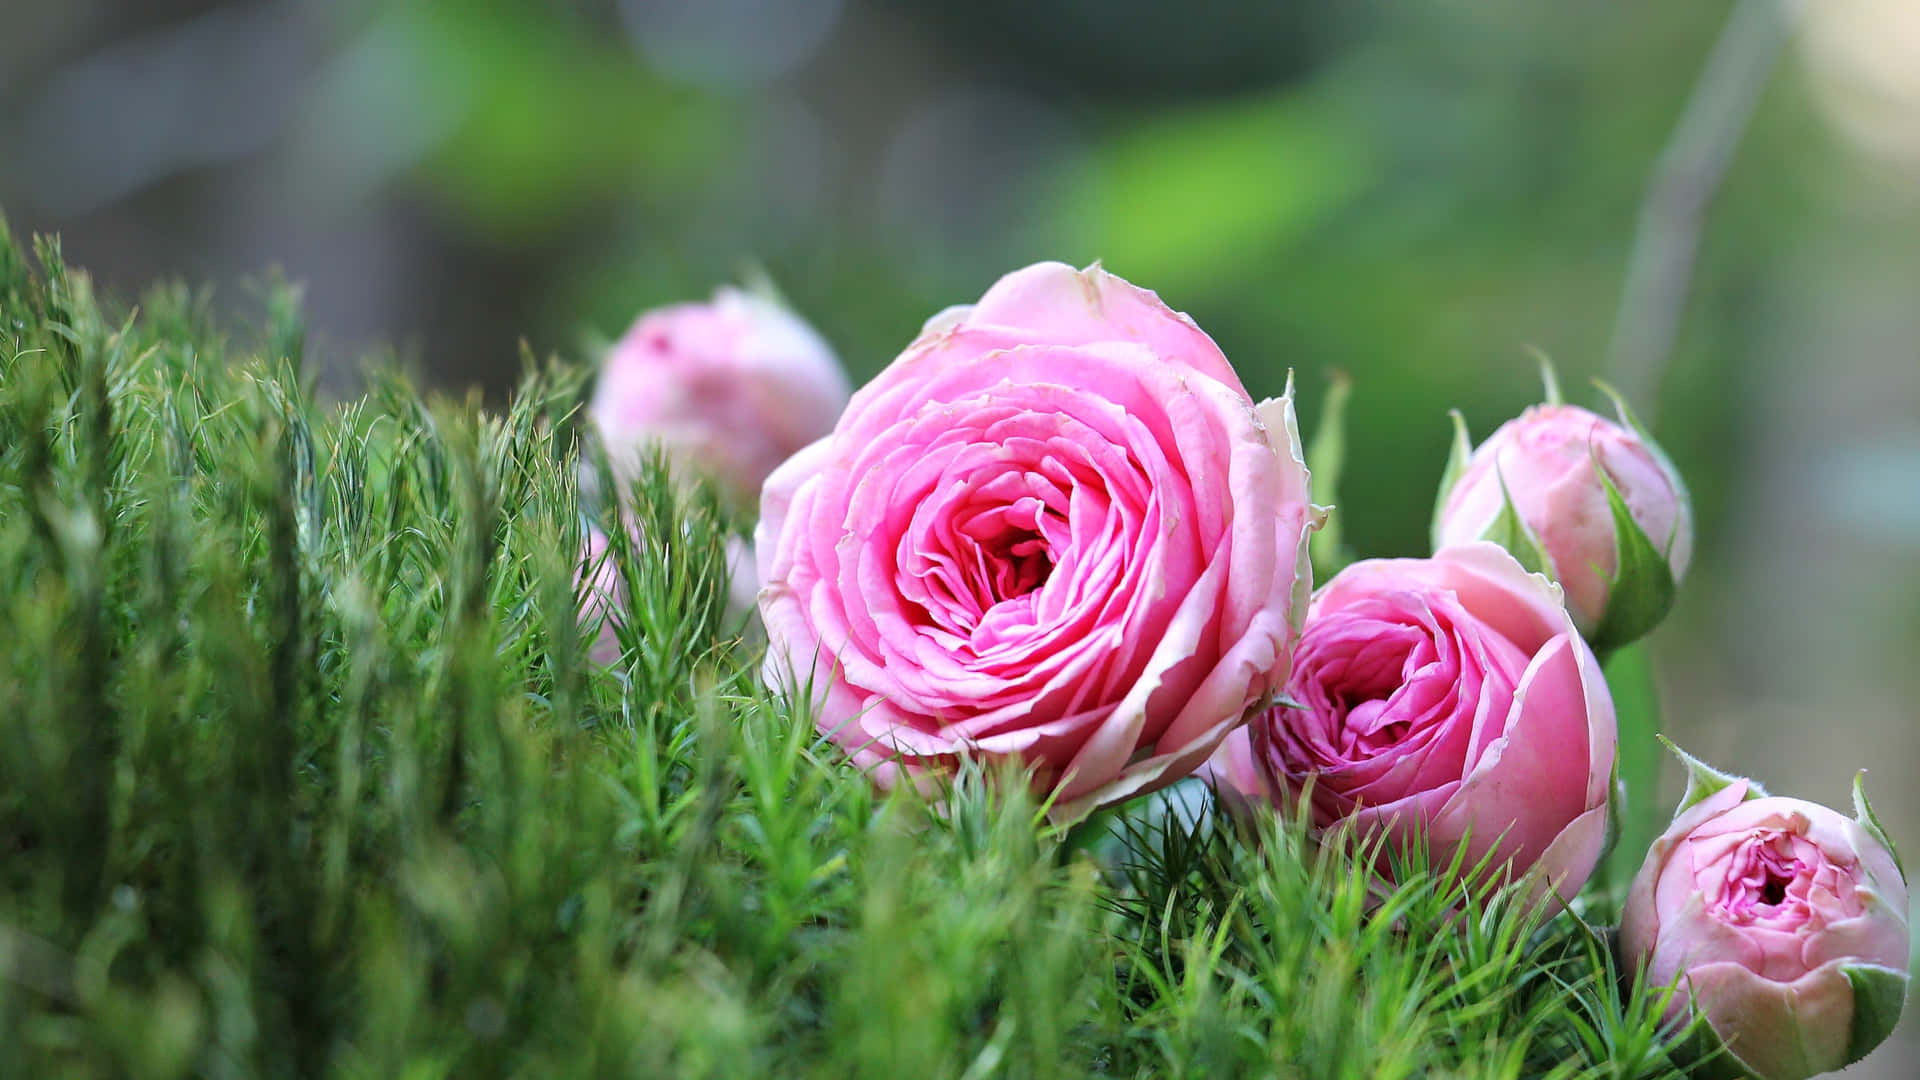 1440p Pink Roses On Moss Background